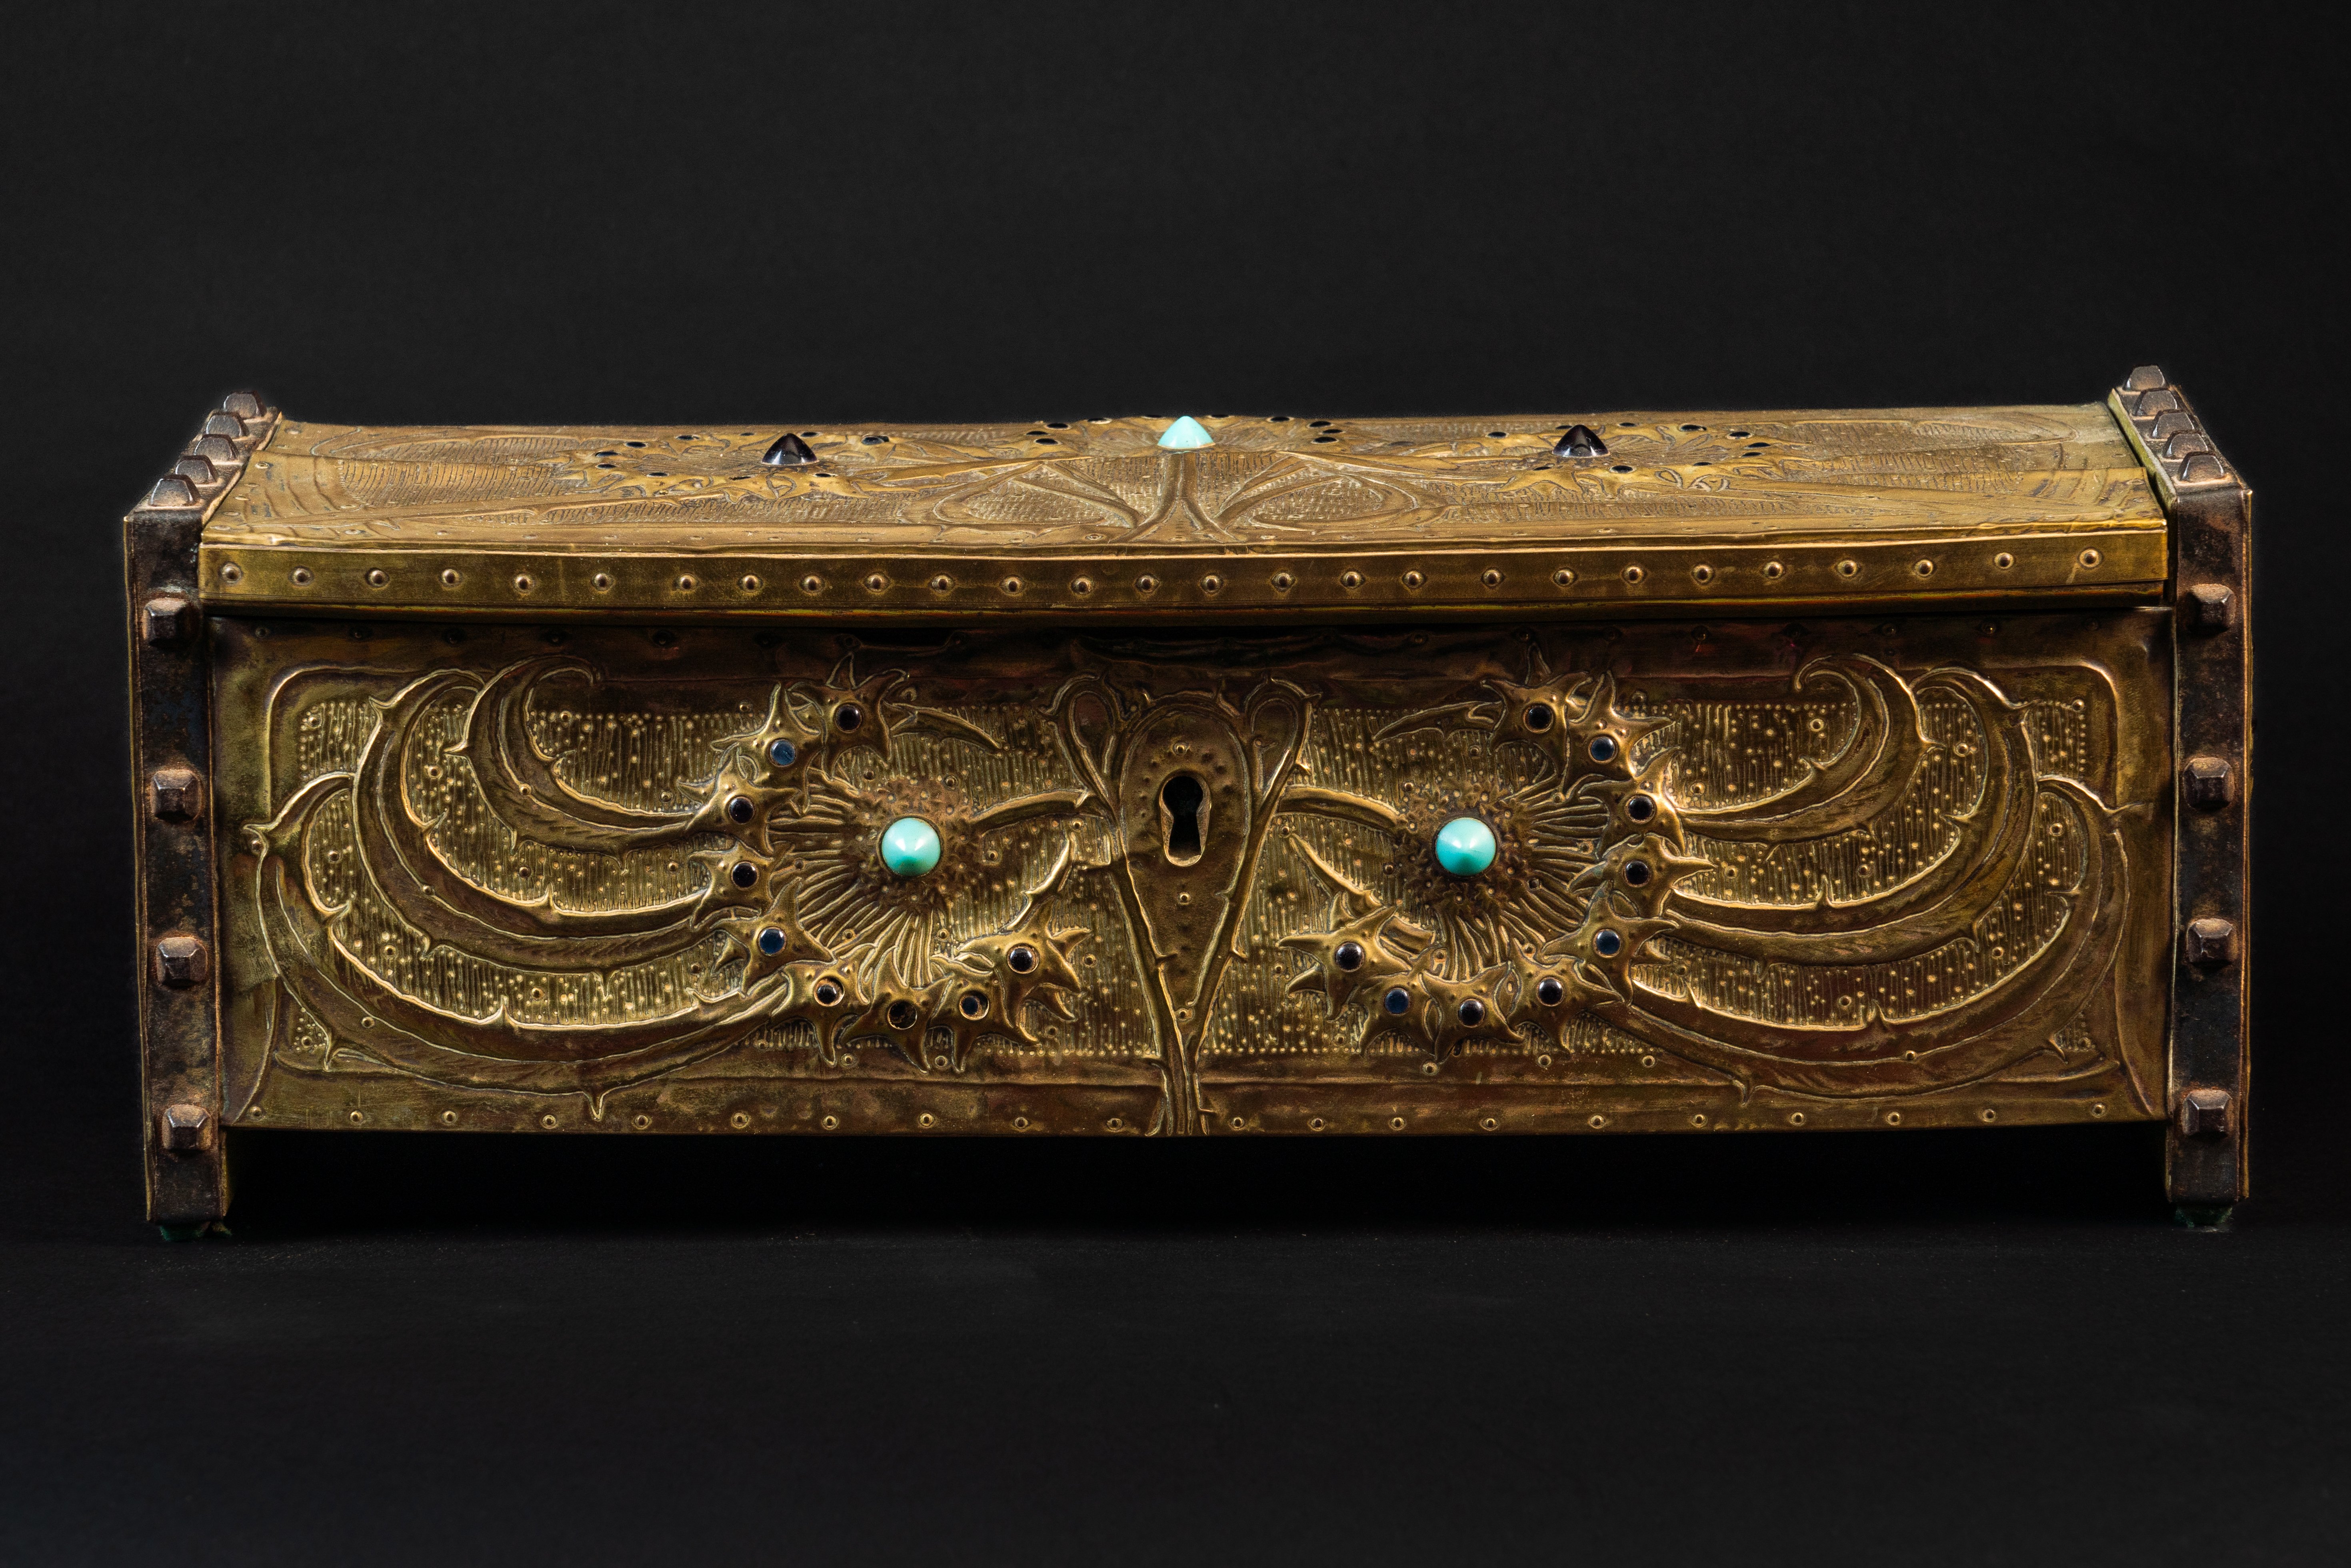 ALFRED DAGUET (1875-1942): A FRENCH ART NOUVEAU EMBOSSED GILT COPPER AND GLASS MOUNTED CASKET...